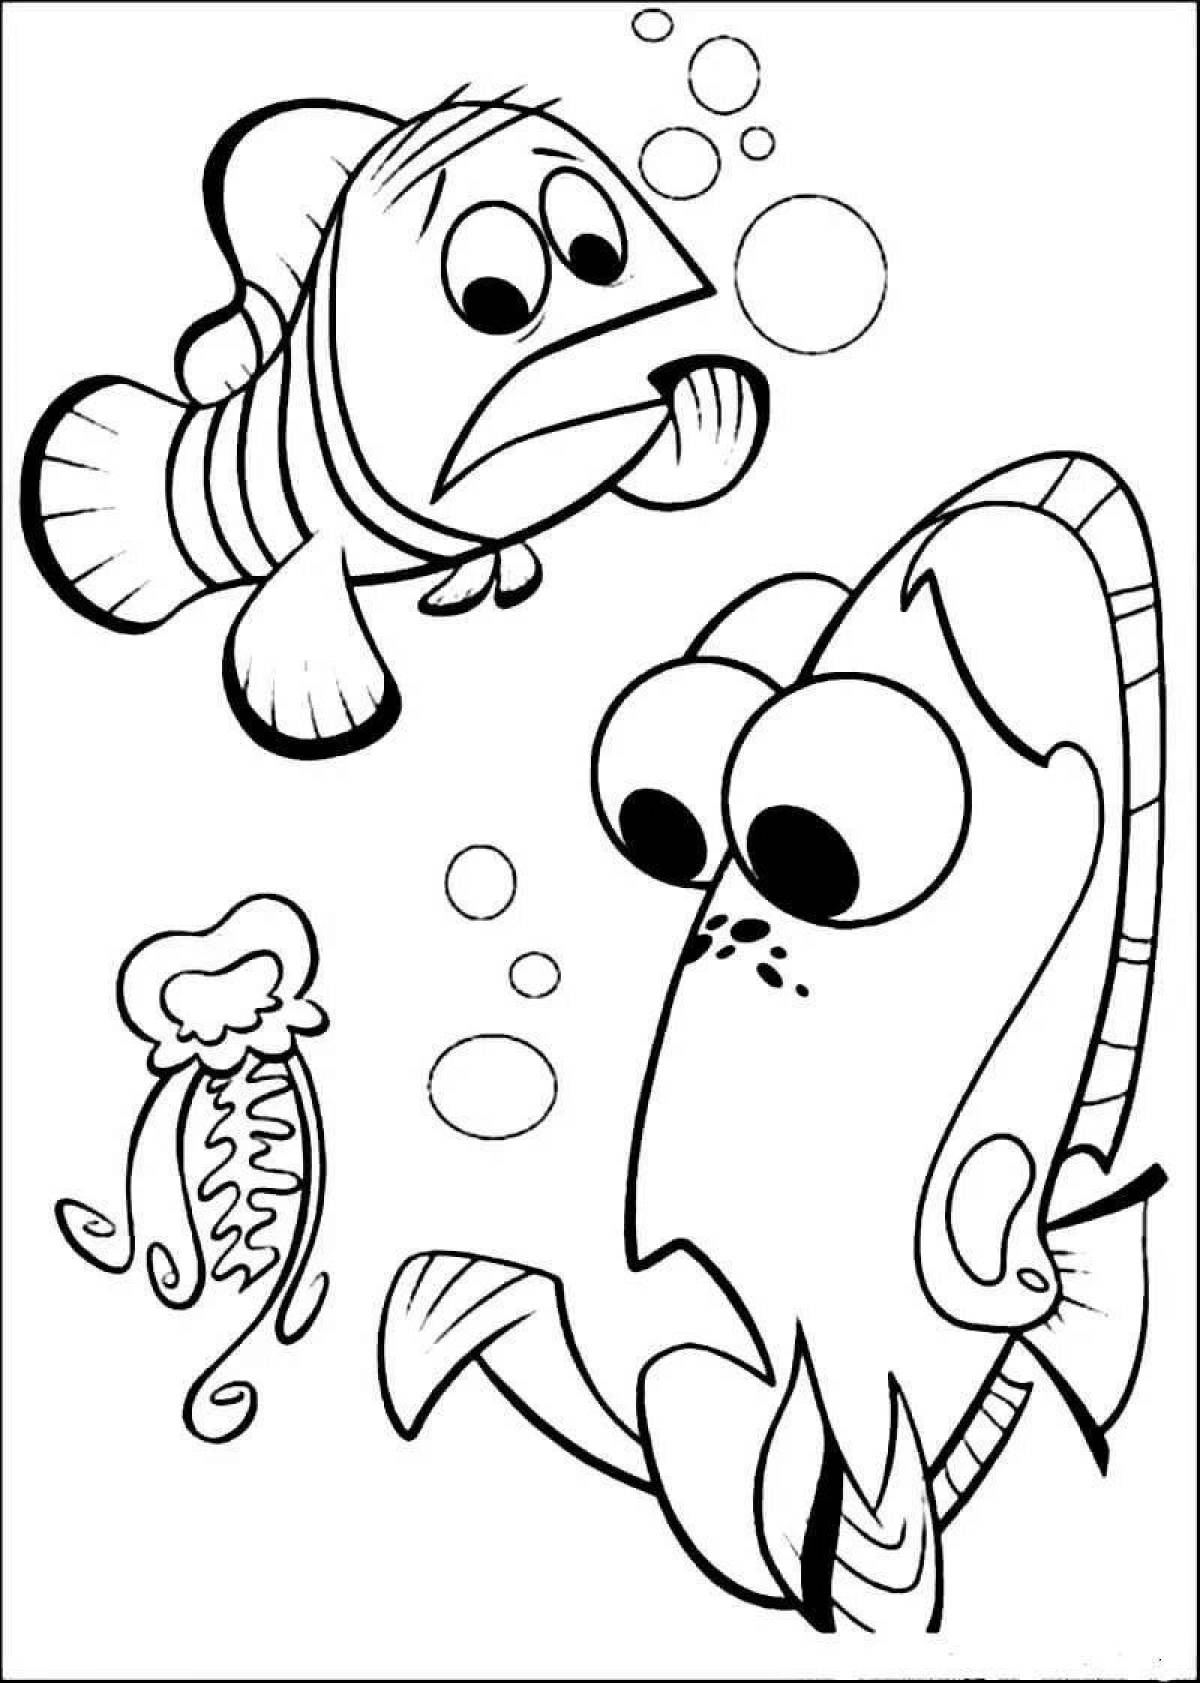 Violent nemo and dory coloring